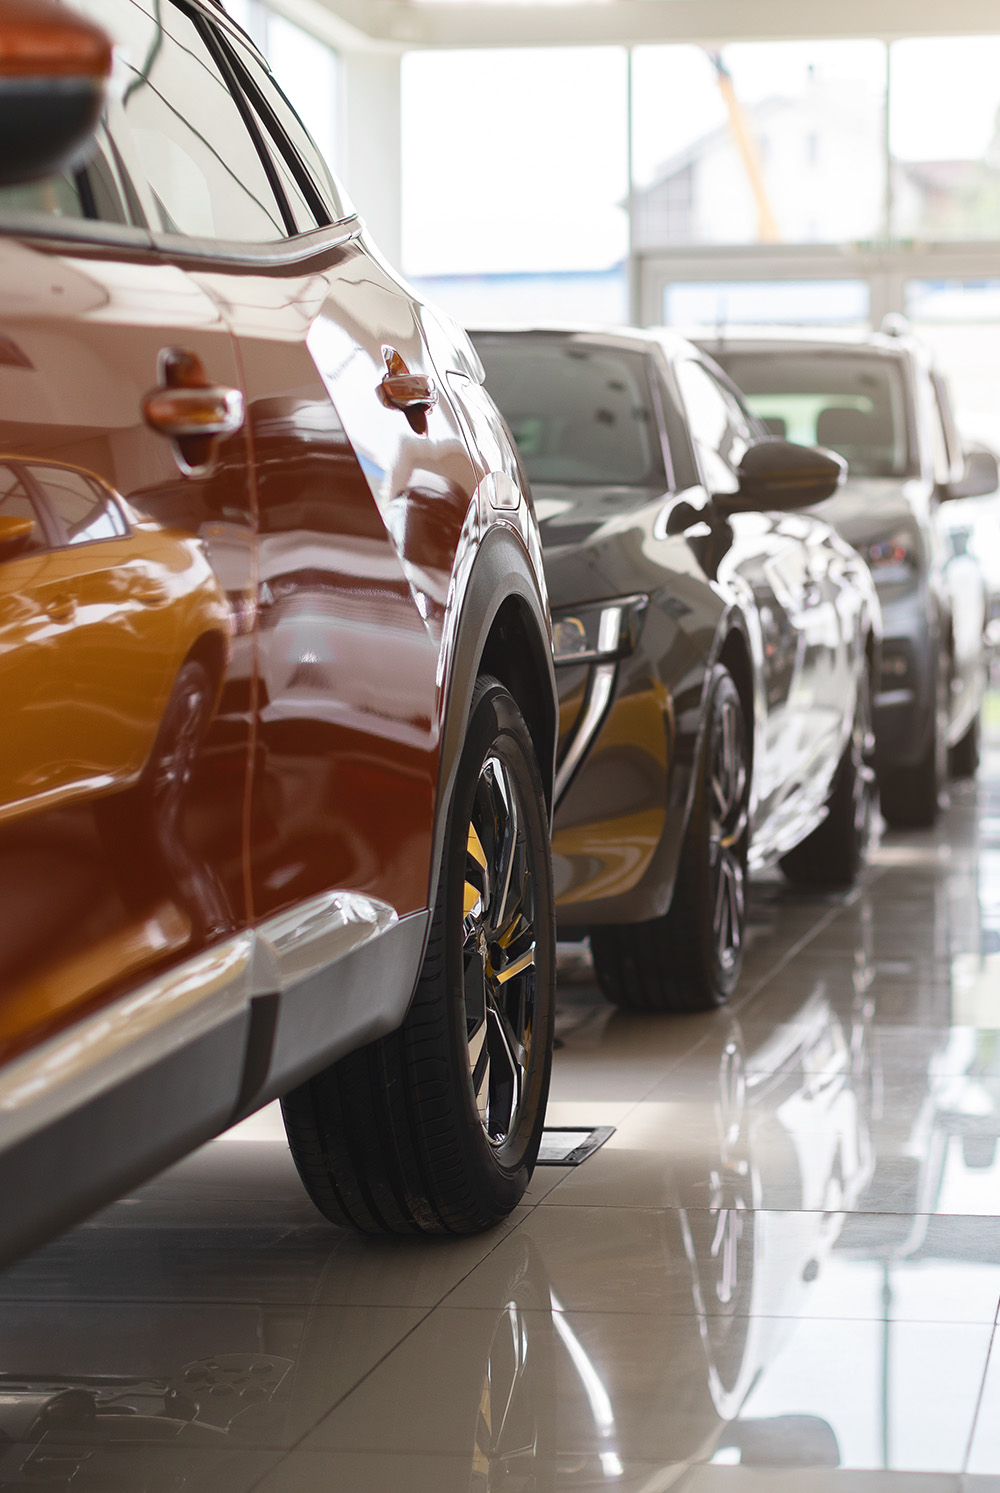 A lineup of cars in a showroom, symbolising Readywire’s comprehensive solution tailored for auto dealership management and operations.